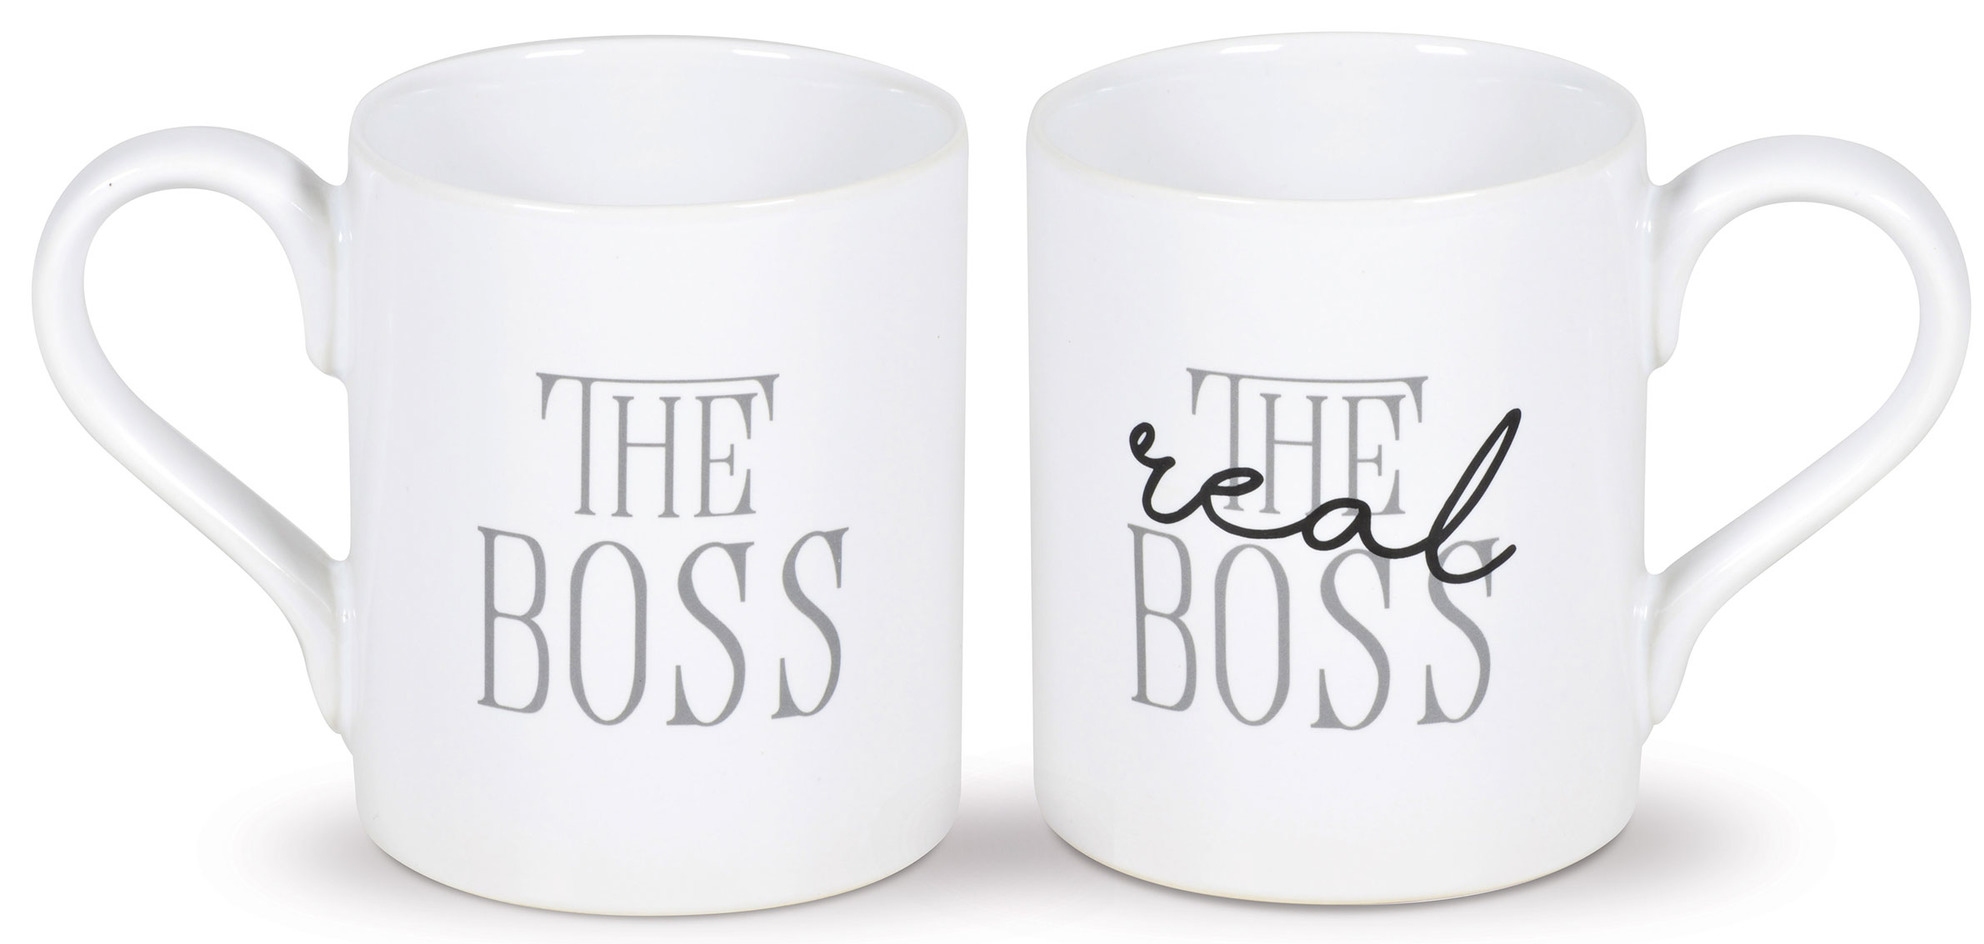 Our Name Is Mud 6005717 Boss and Real Boss Set of 2 Mugs